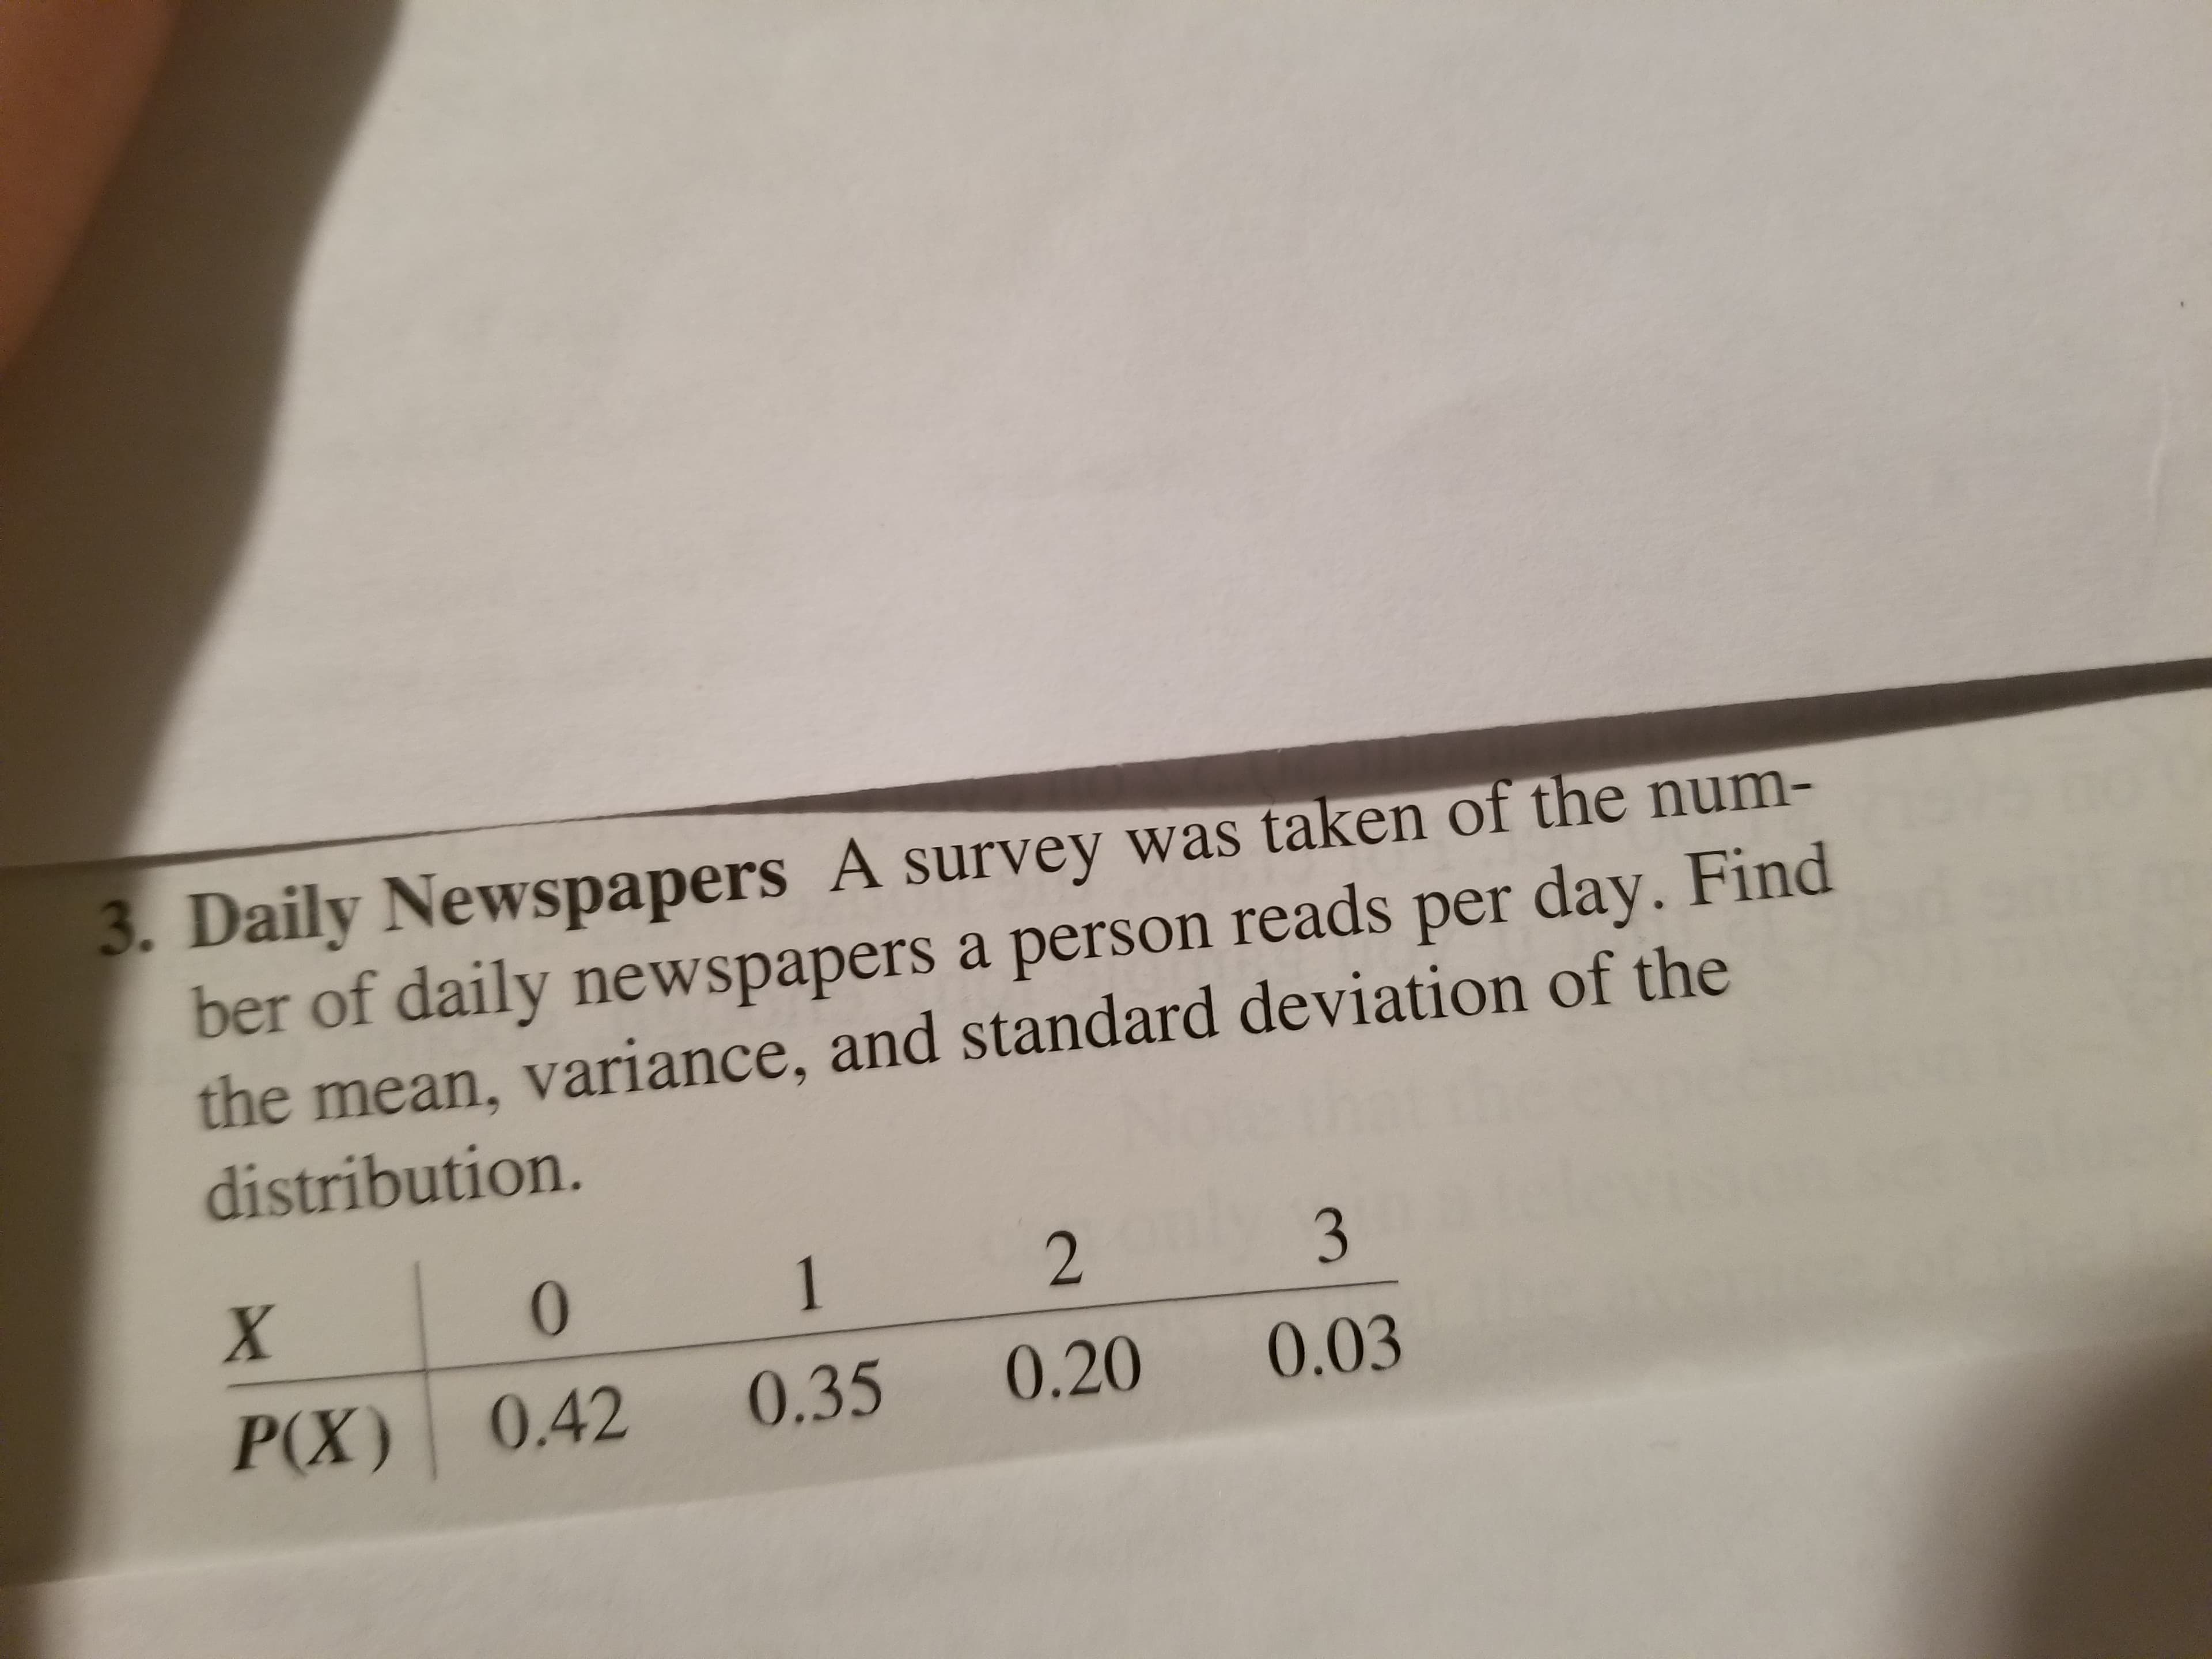 Daily Newspapers A survey was taken of the num-
ber of daily newspapers a person reads per day. Find
the mean, variance, and standard deviation of the
distribution.
0
2
P(X) 0.42 0.35 0.20 0.03
